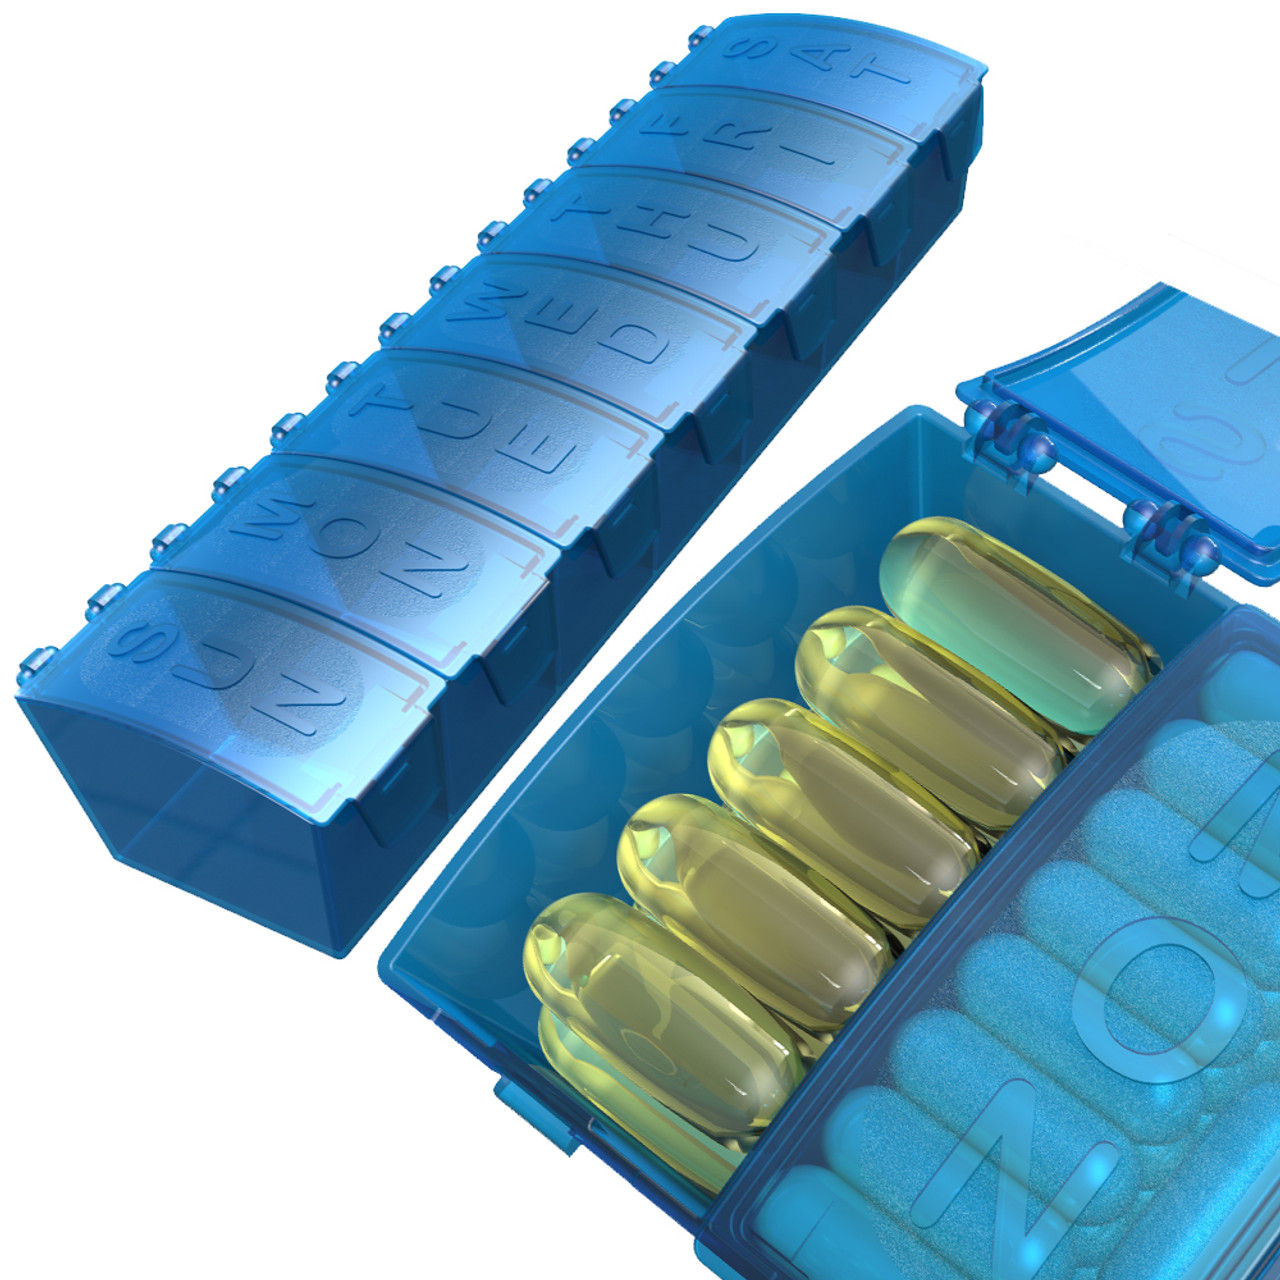 Water Bottle & Portable Pill Organizer, 7 Day Pill Case + 8oz Cup